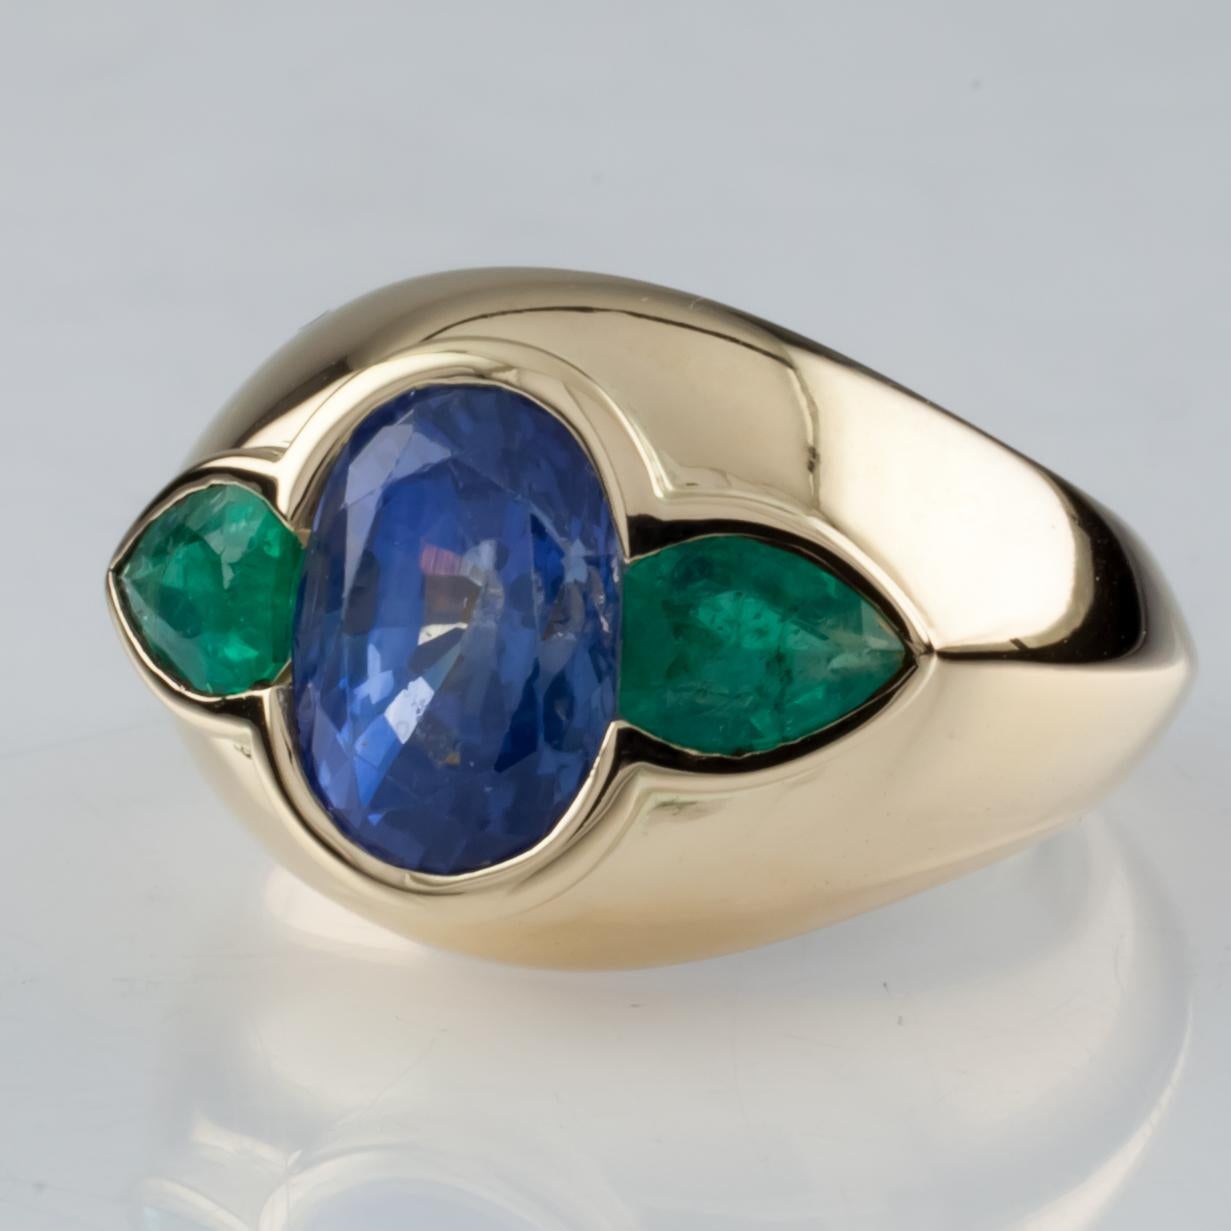 Features Natural Oval Corundum (Sapphire) Center Stone
Color: Transparent Blue
Measurements: 9.50 mm x 7.00 mm x 6.03 mm
Approximately 4 carats
Includes Two Green Modified Pear Mixed Cut Emeralds
Approximately .80 carats
Size: 5
Total Mass = 8.43